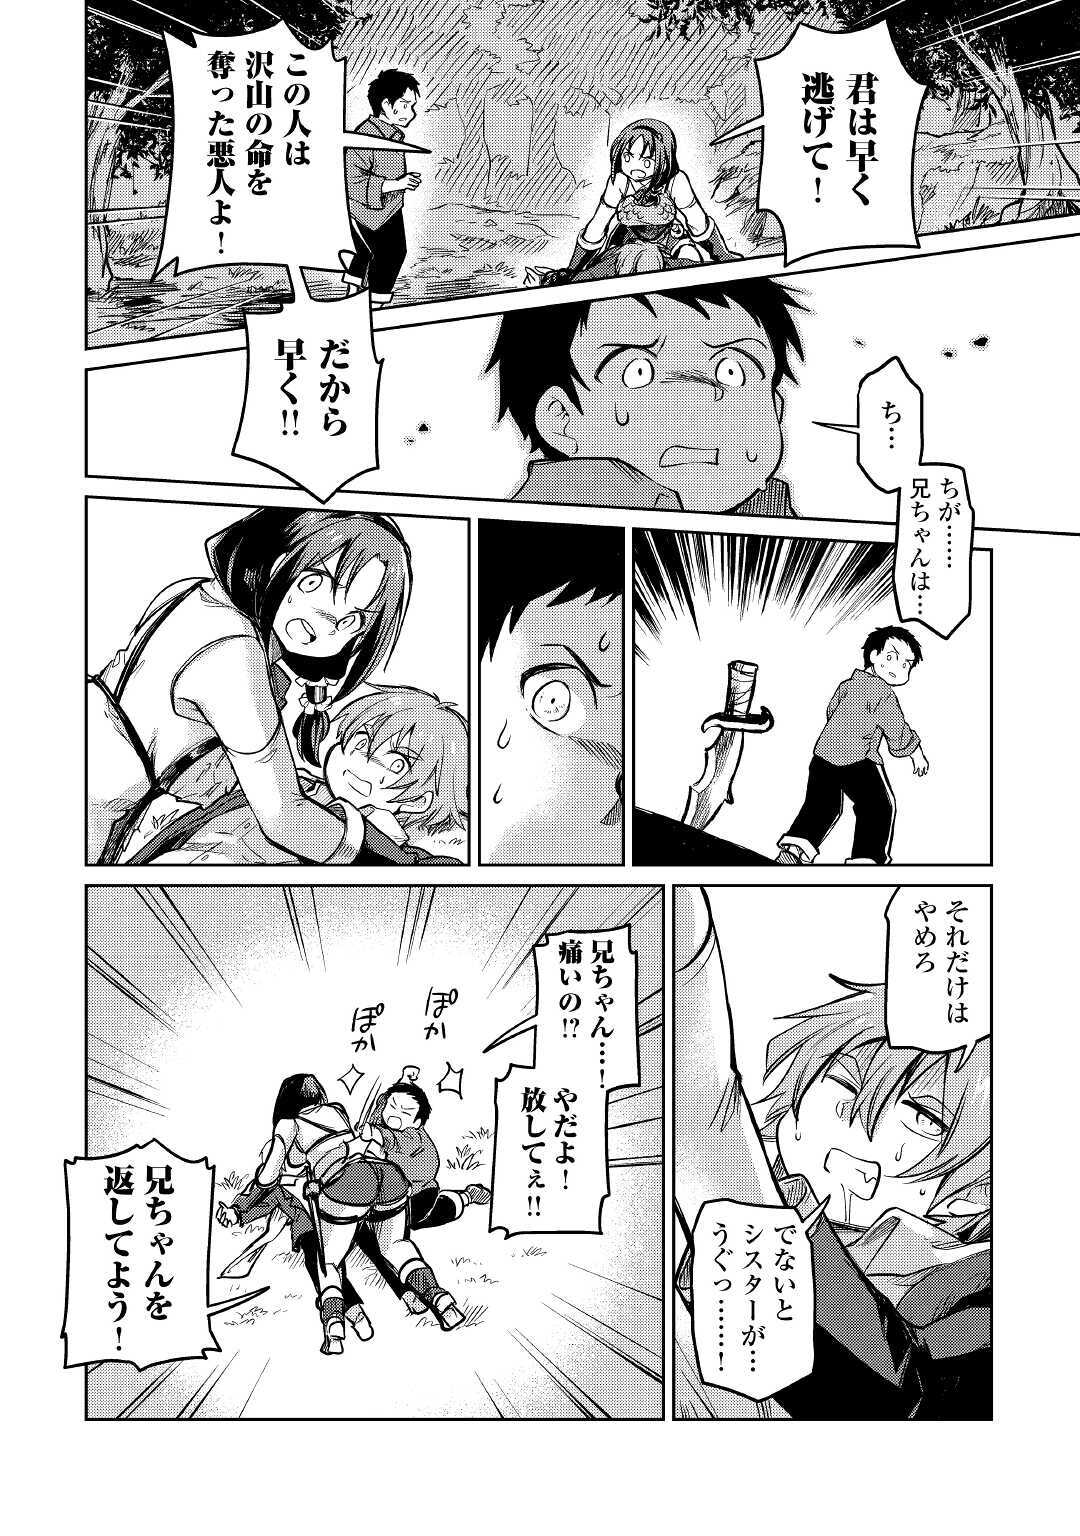 The Former Structural Researcher’s Story of Otherworldly Adventure 第33話 - Page 14